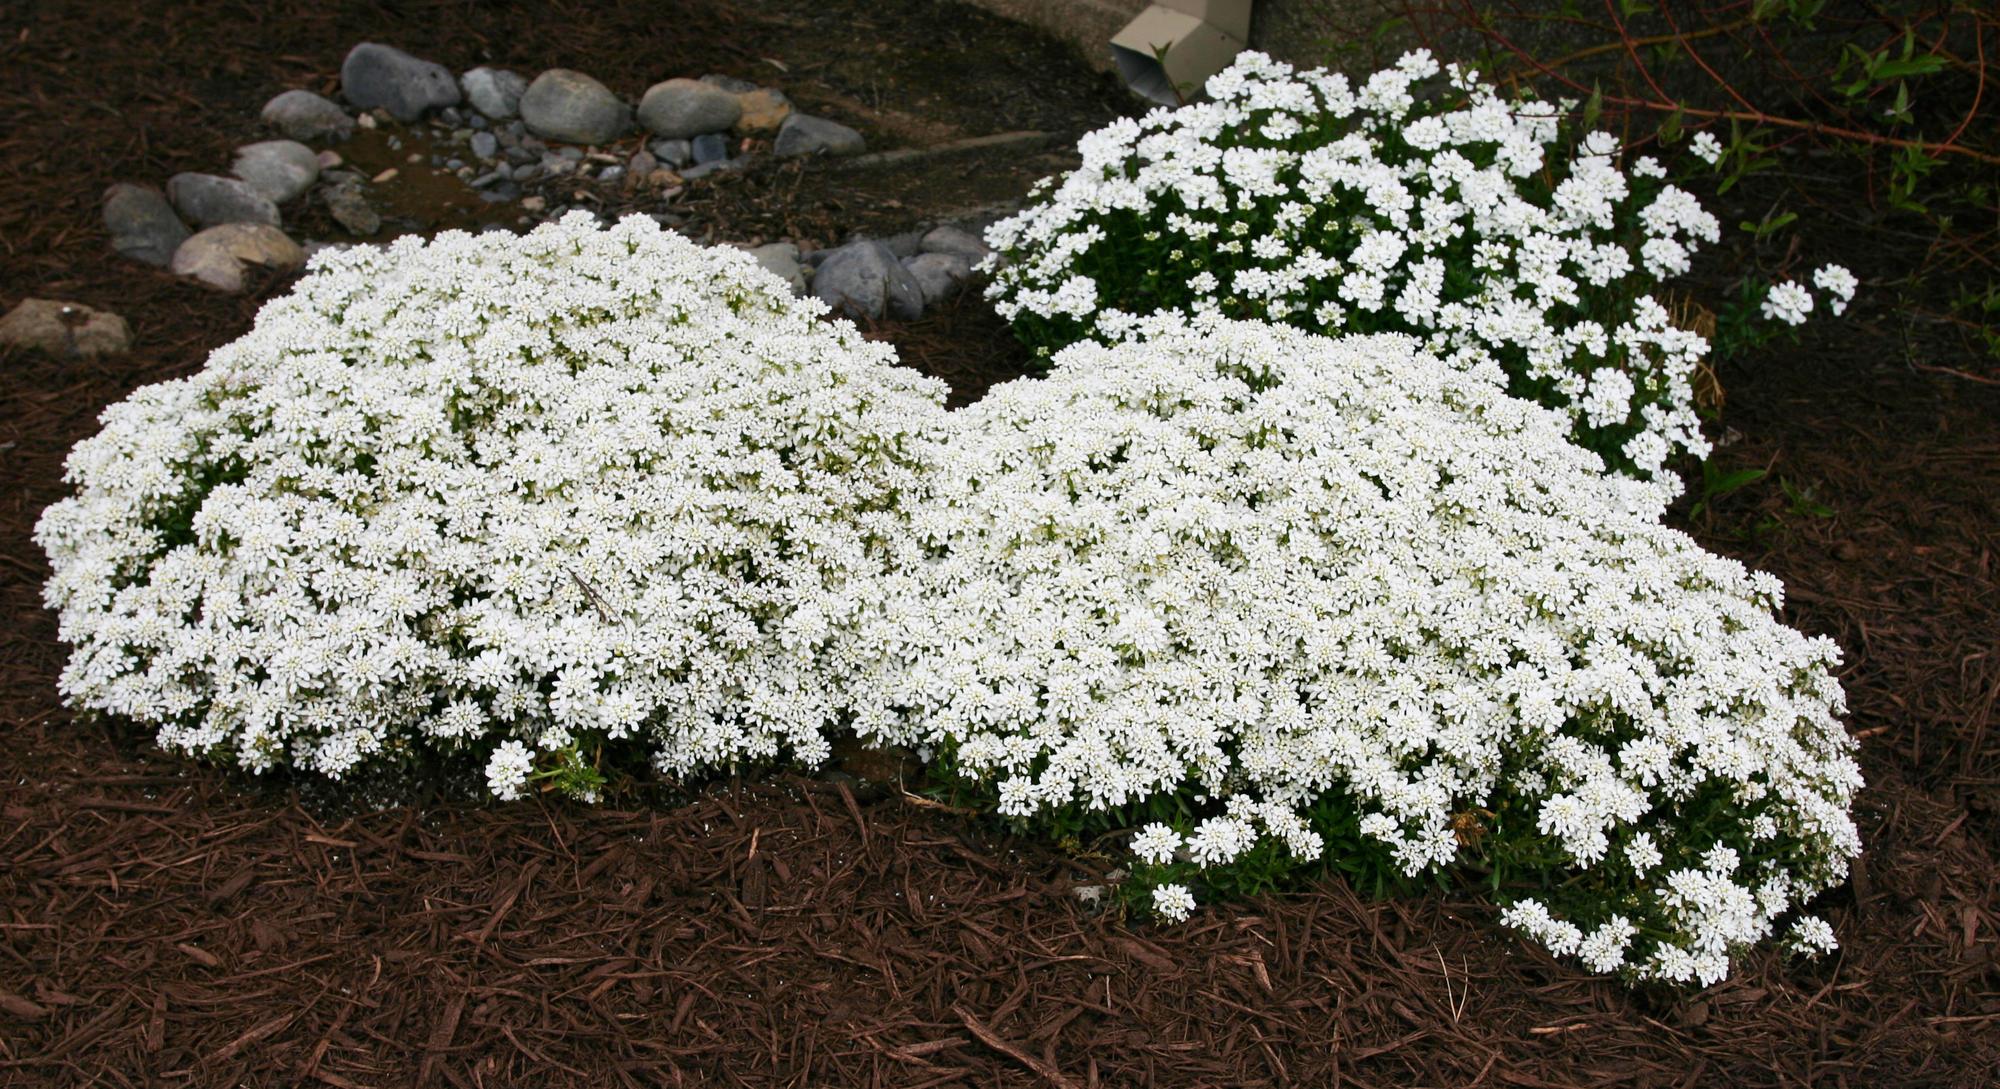 Low-growing plants completely covered with white flowers